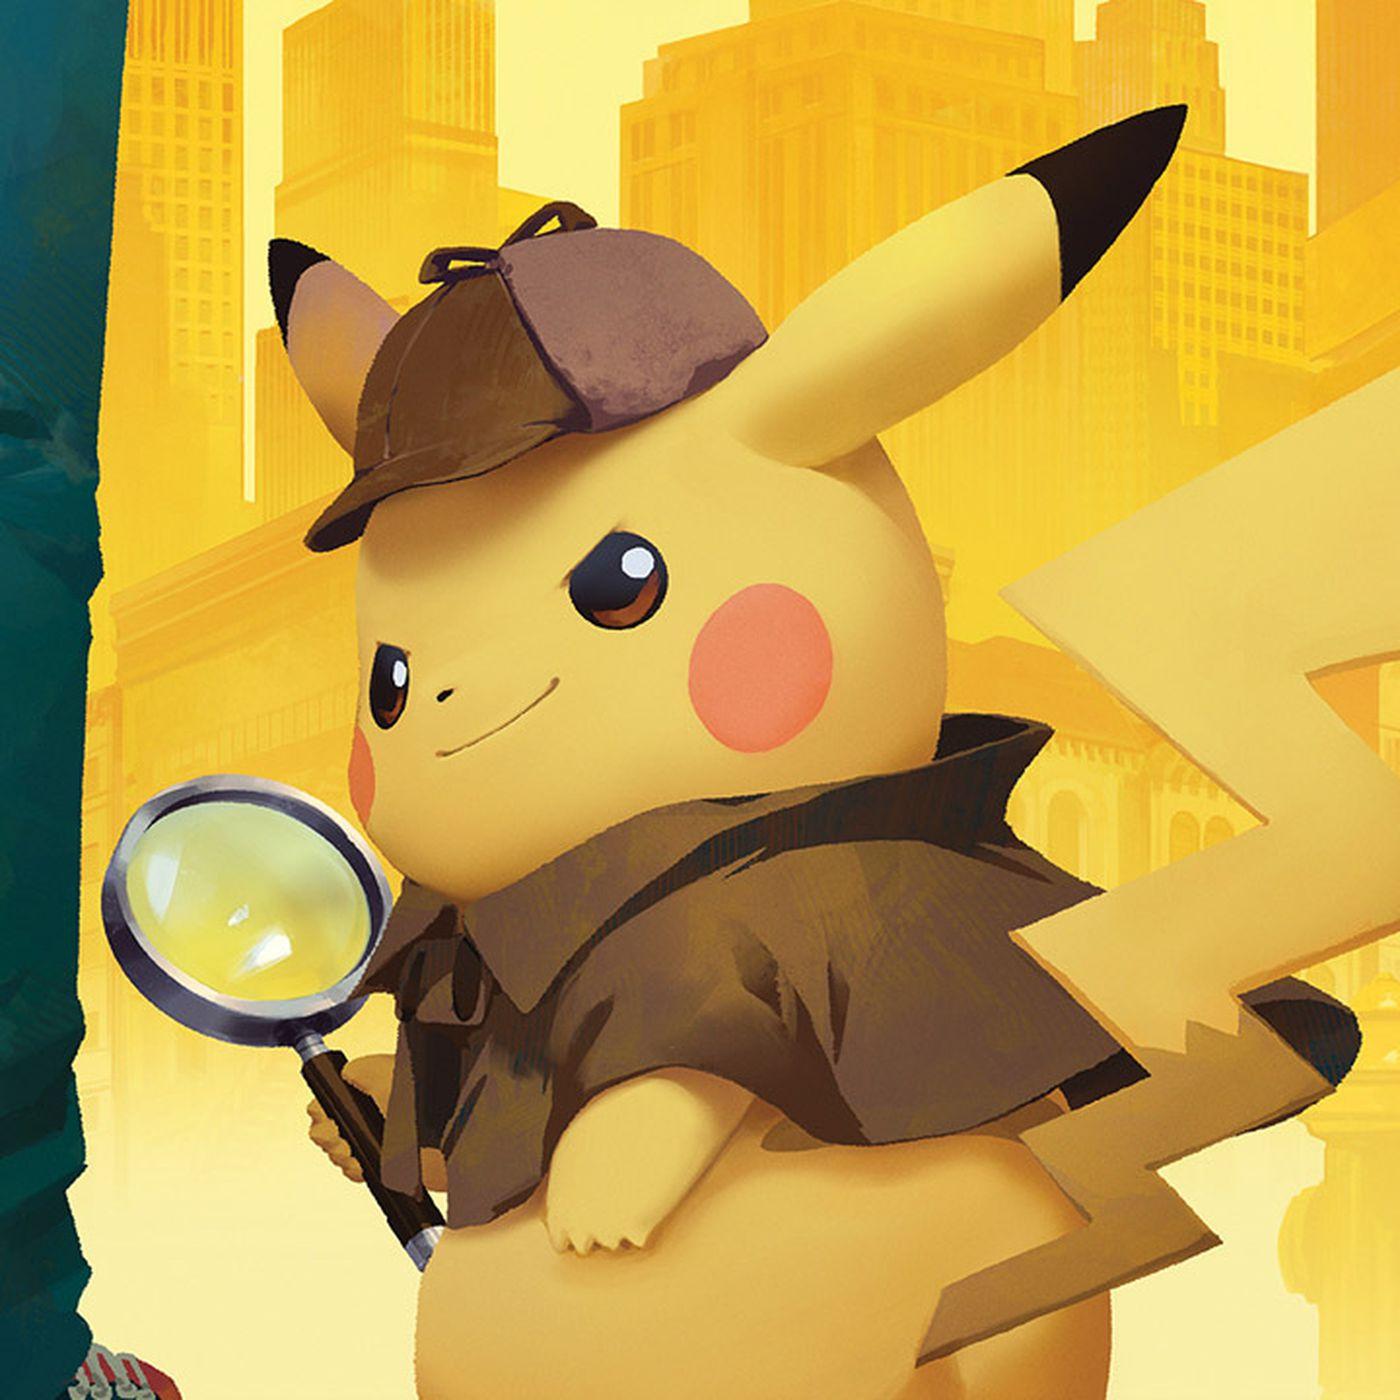 Detective Pikachu's creators say the game's real mystery is